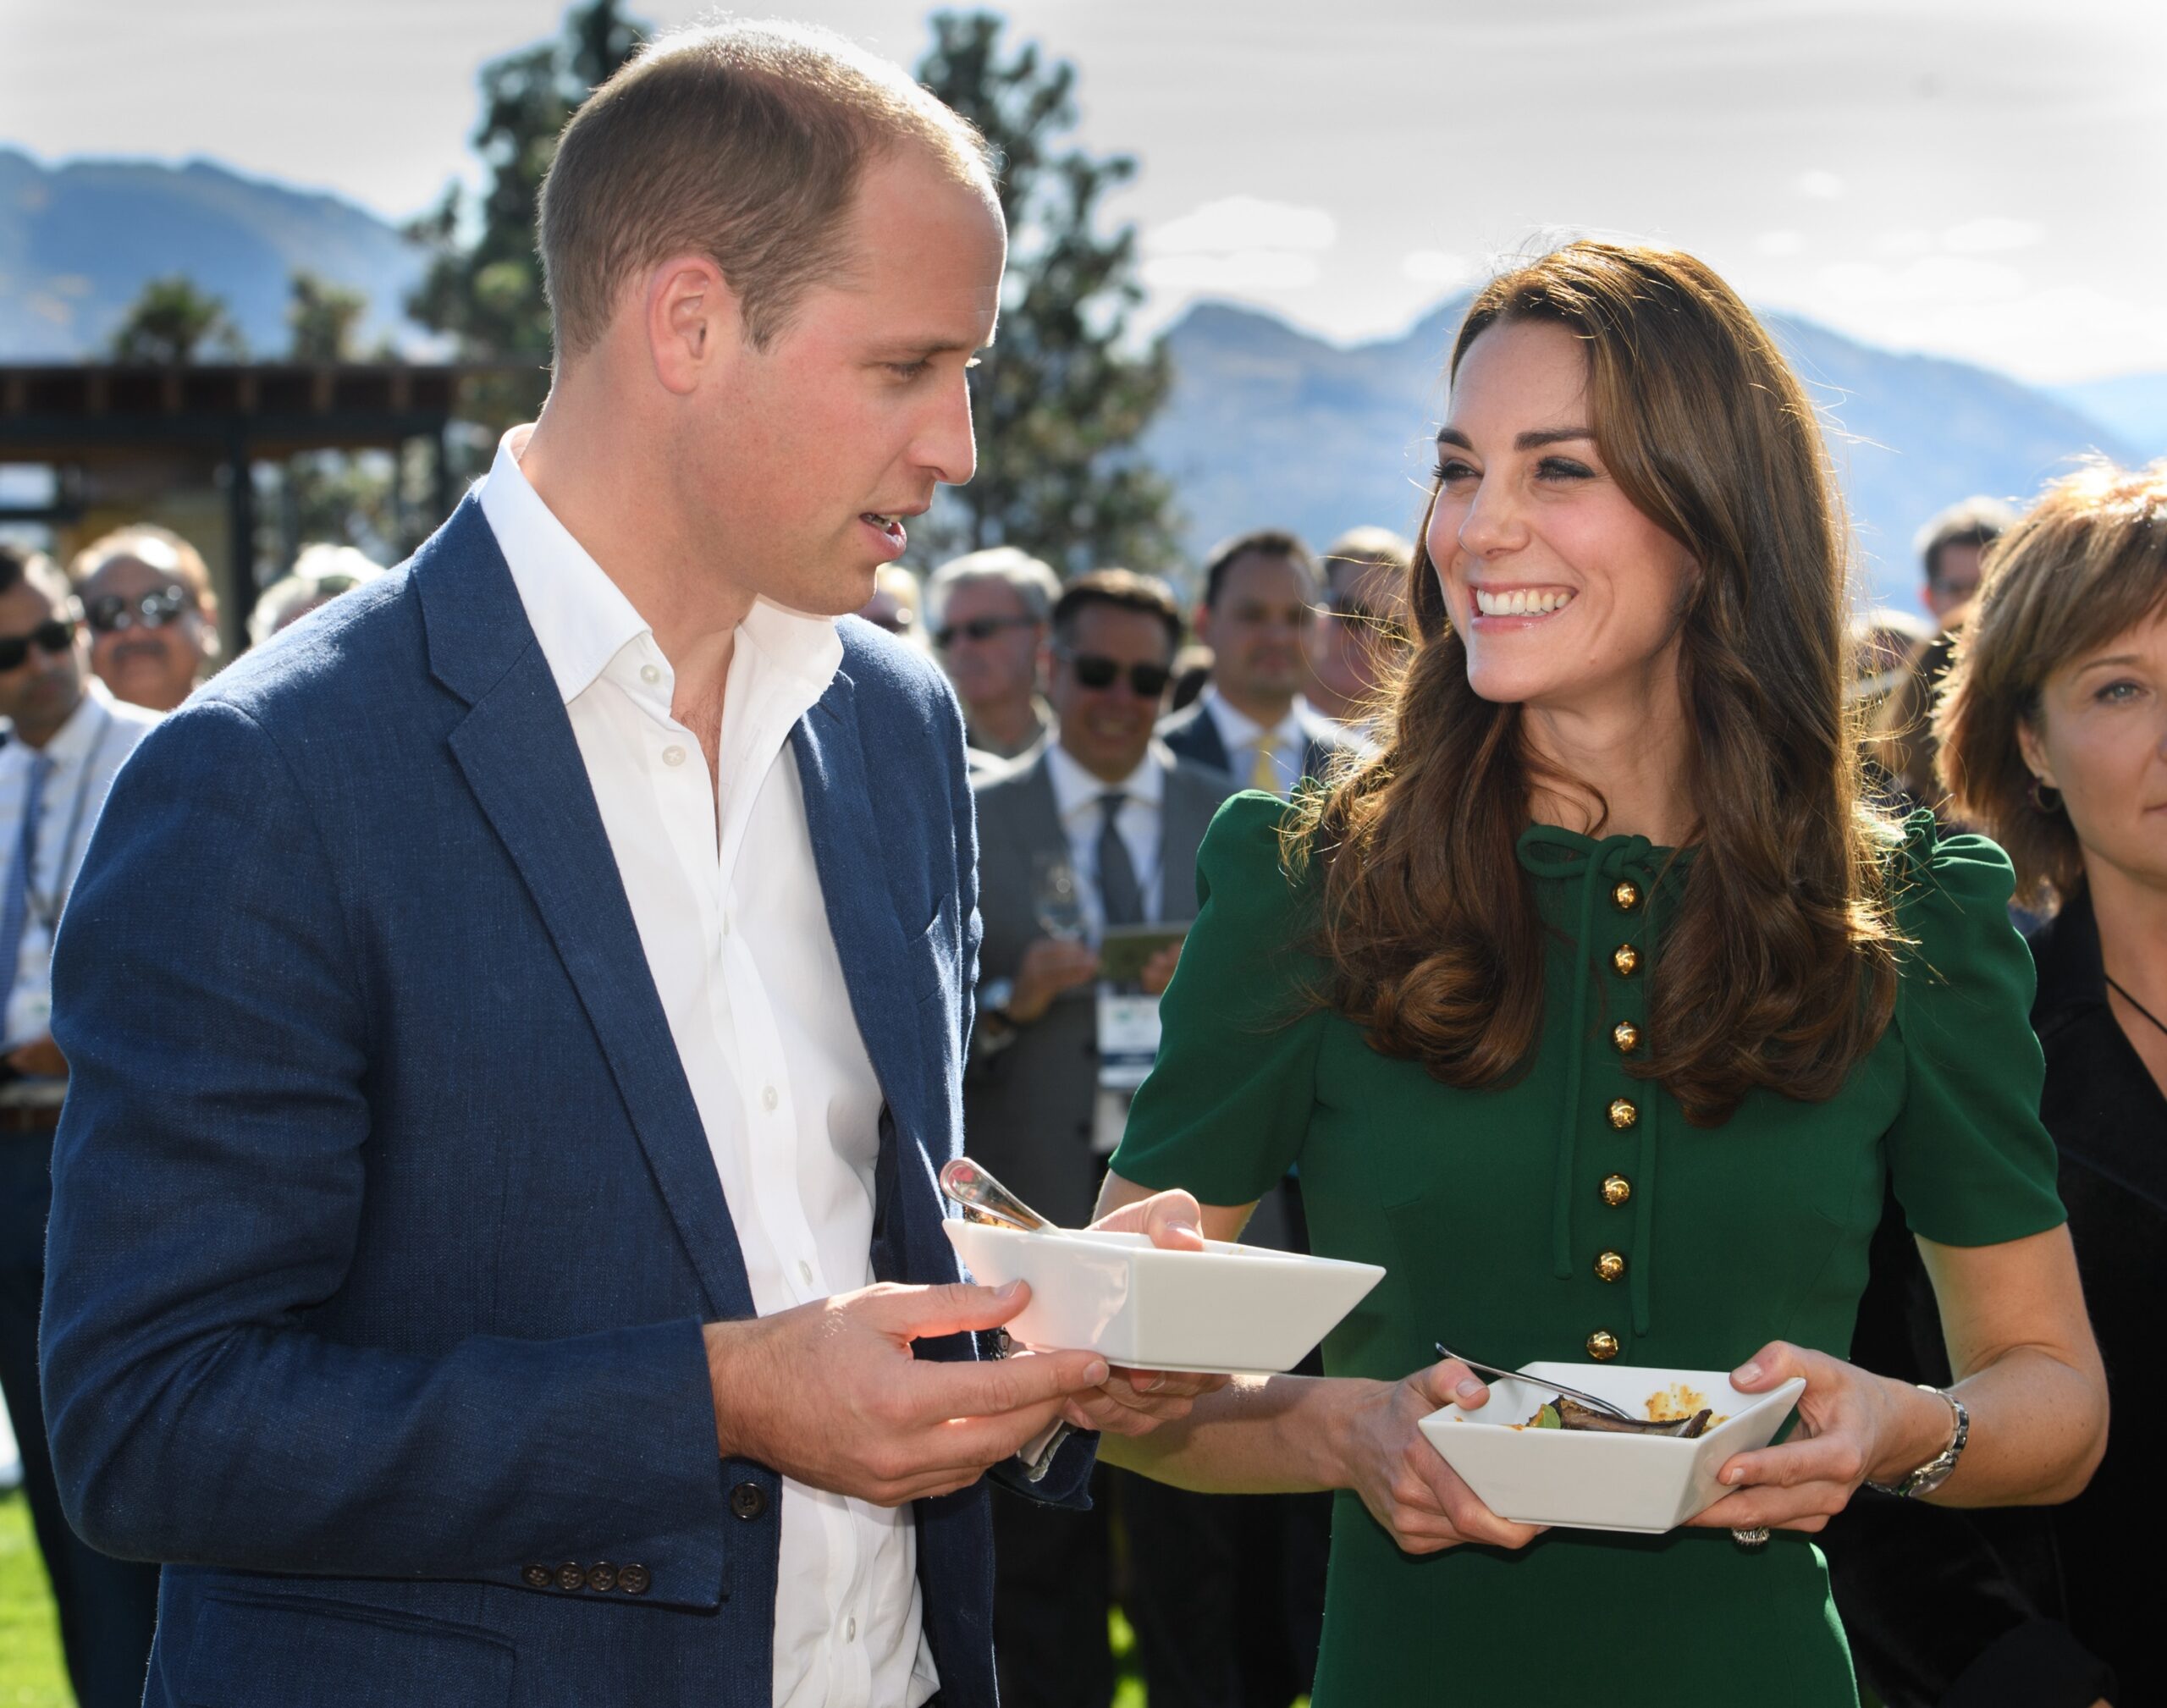 Four foods the British royals never eat – and two of them are very surprising